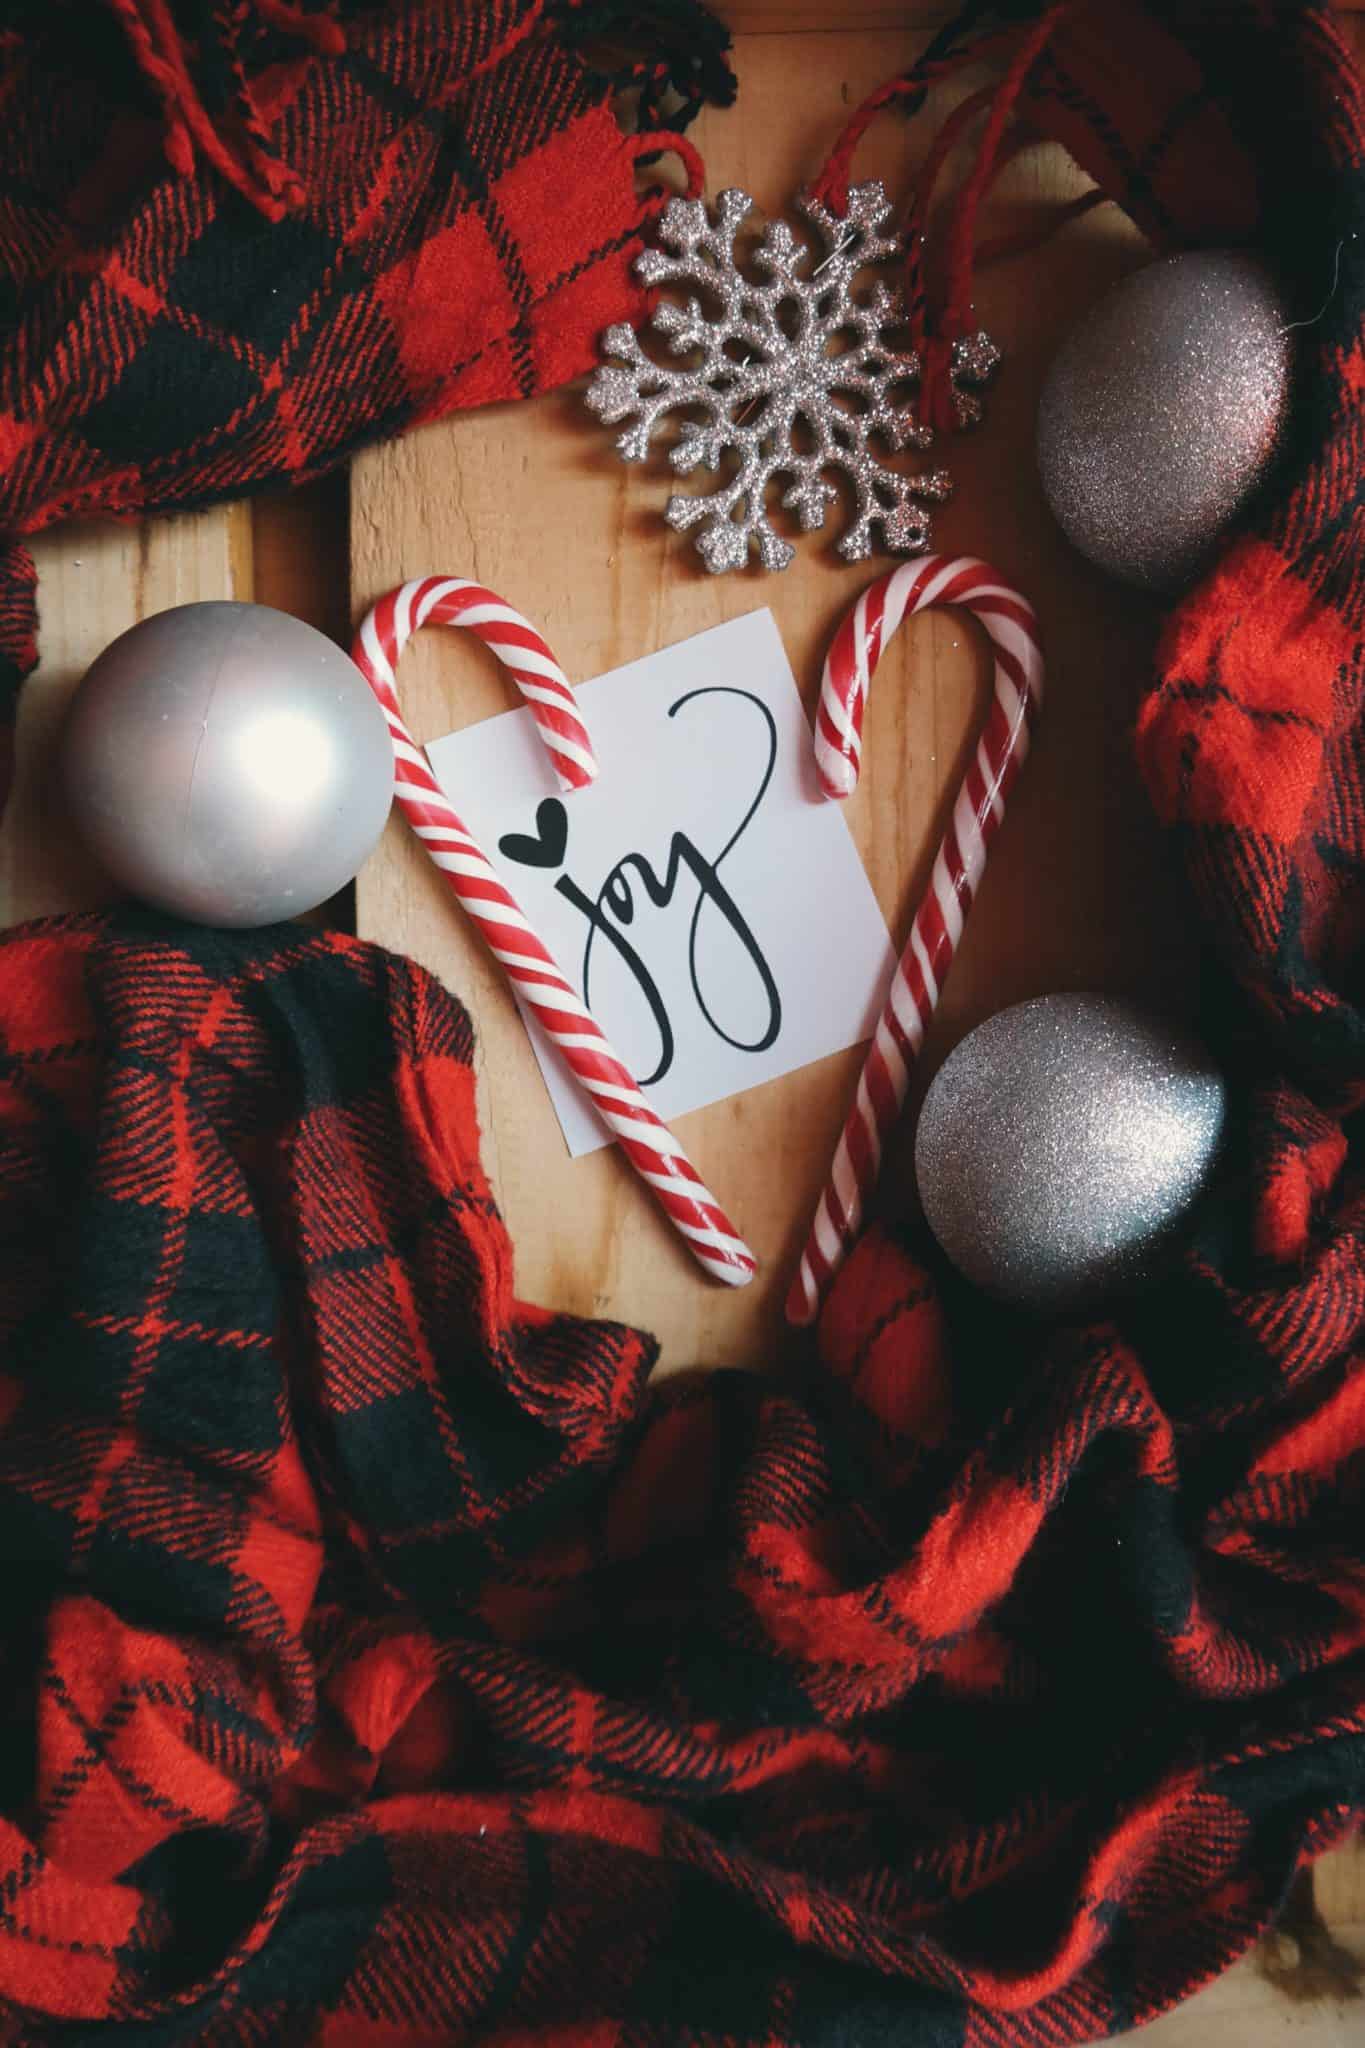 50+ Cute Christmas Aesthetic Wallpaper For Your Iphone! All in HD!